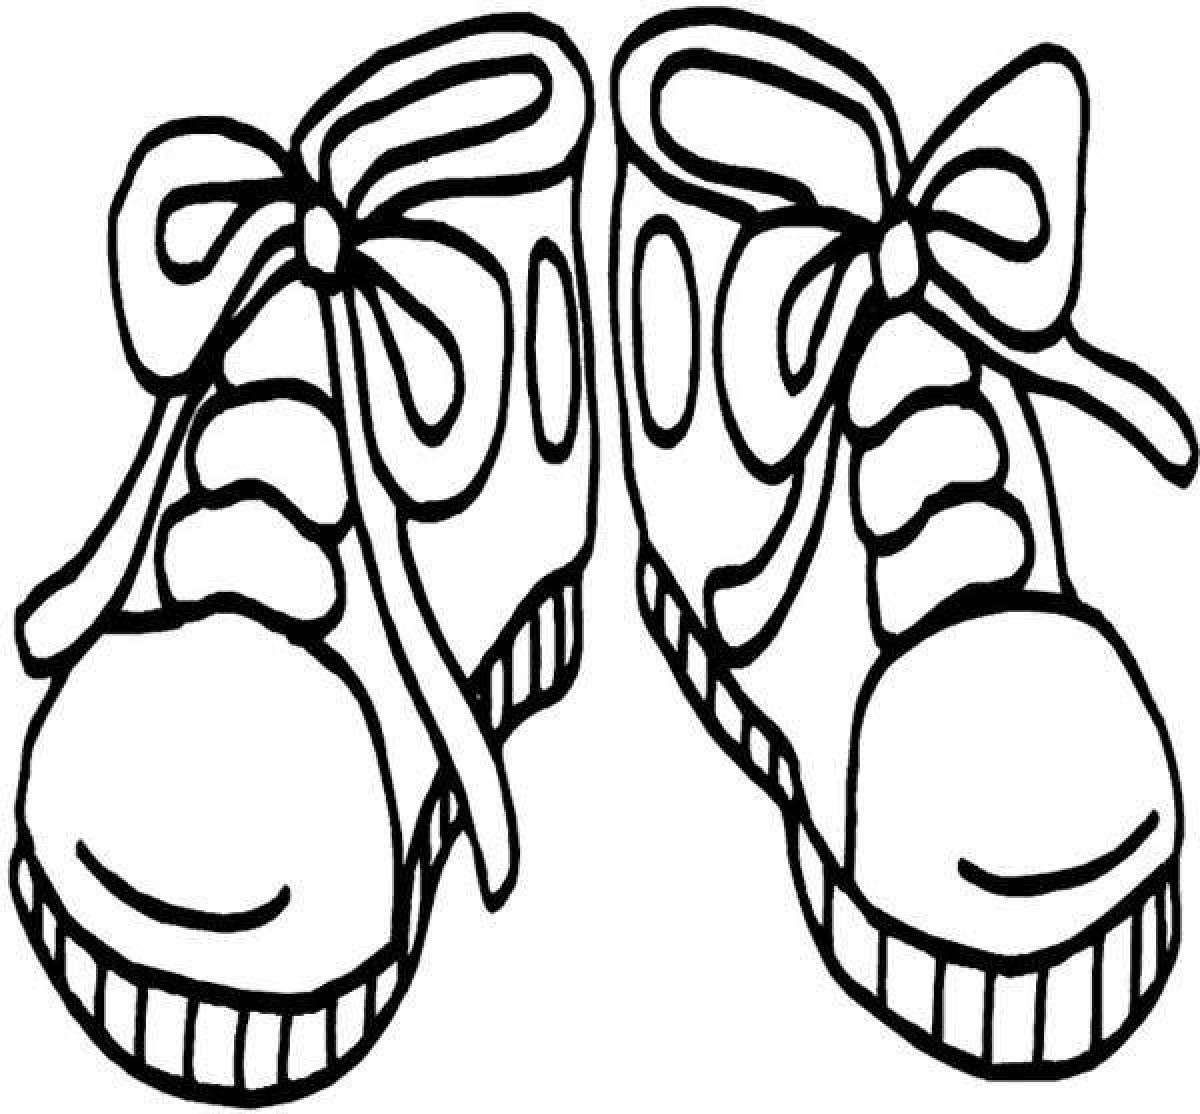 Fun coloring book for children's shoes